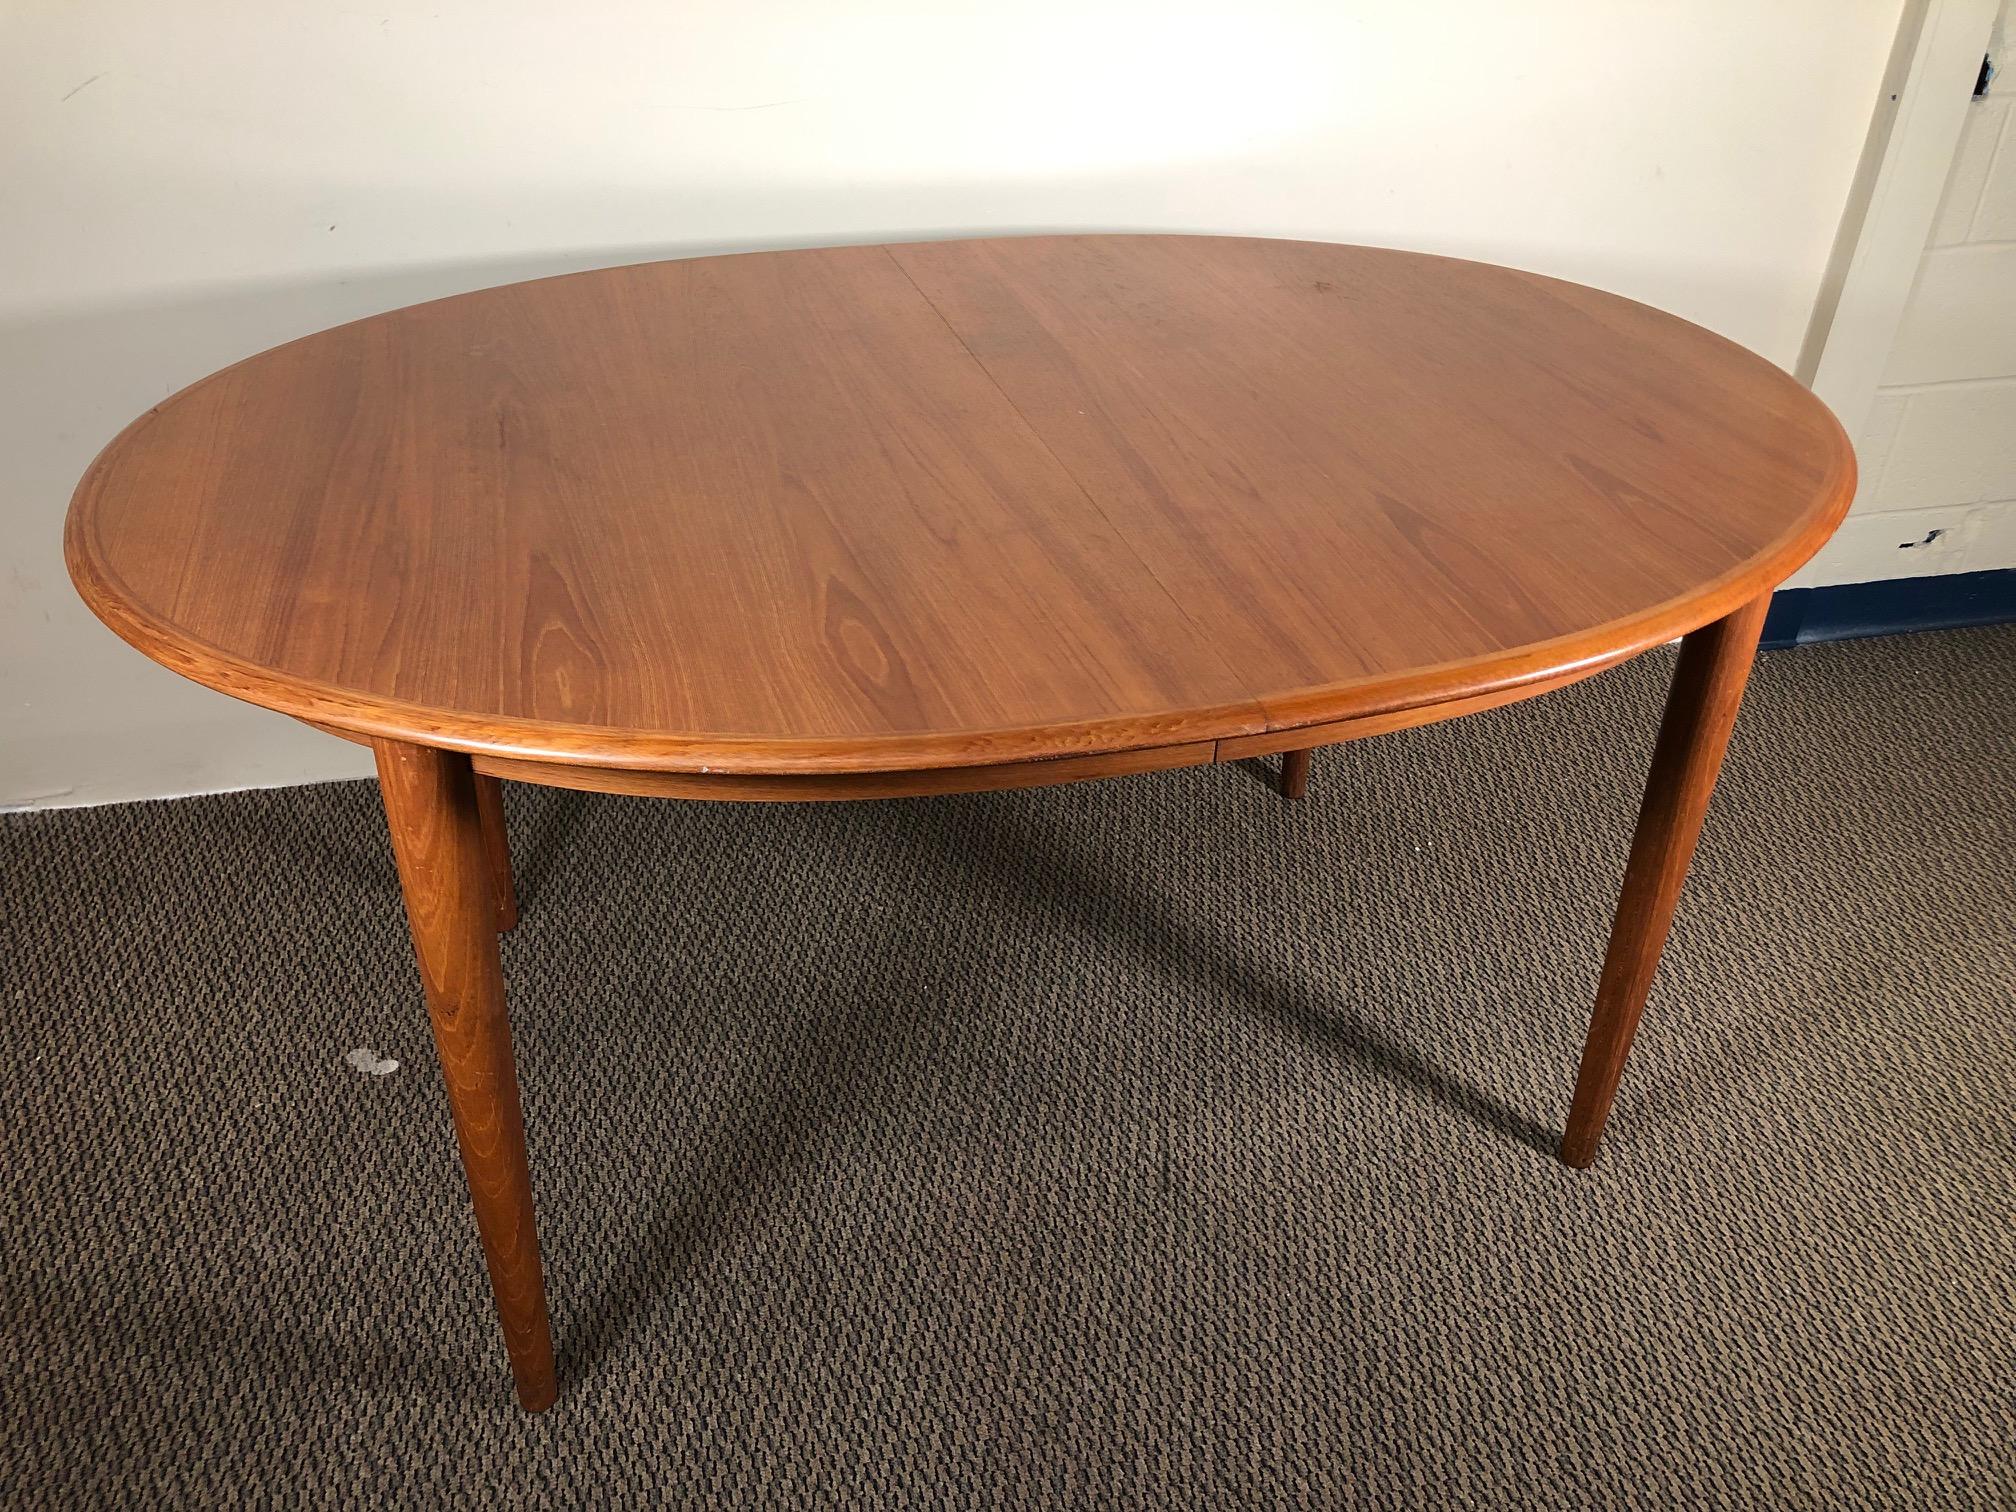 This is a 1960s teak dining table with 2 leaves. Leaves can be stored inside the table when not in use. The table can be extended with one or with both leaves.

It seats 10 people comfortably when fully extended.

Very good vintage condition.